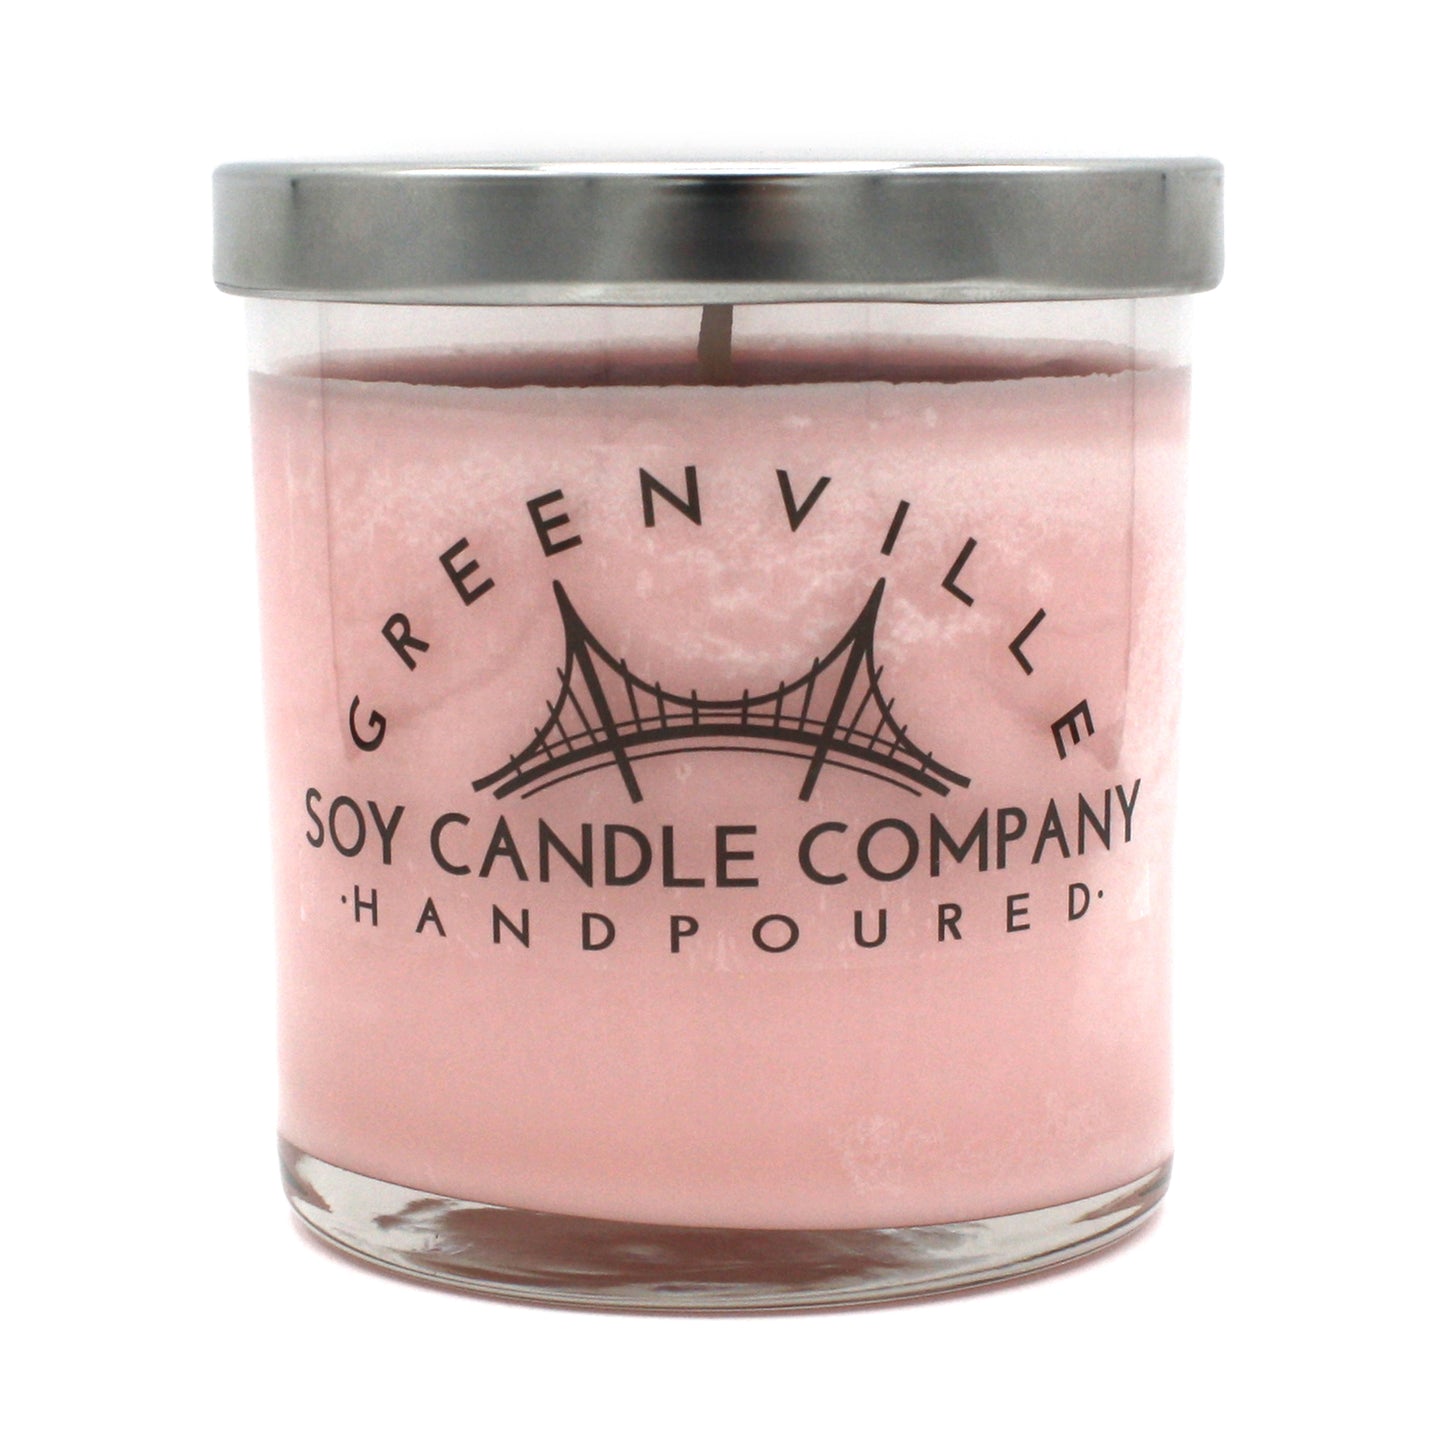 Hard Candy Christmas, 10oz Soy Candle